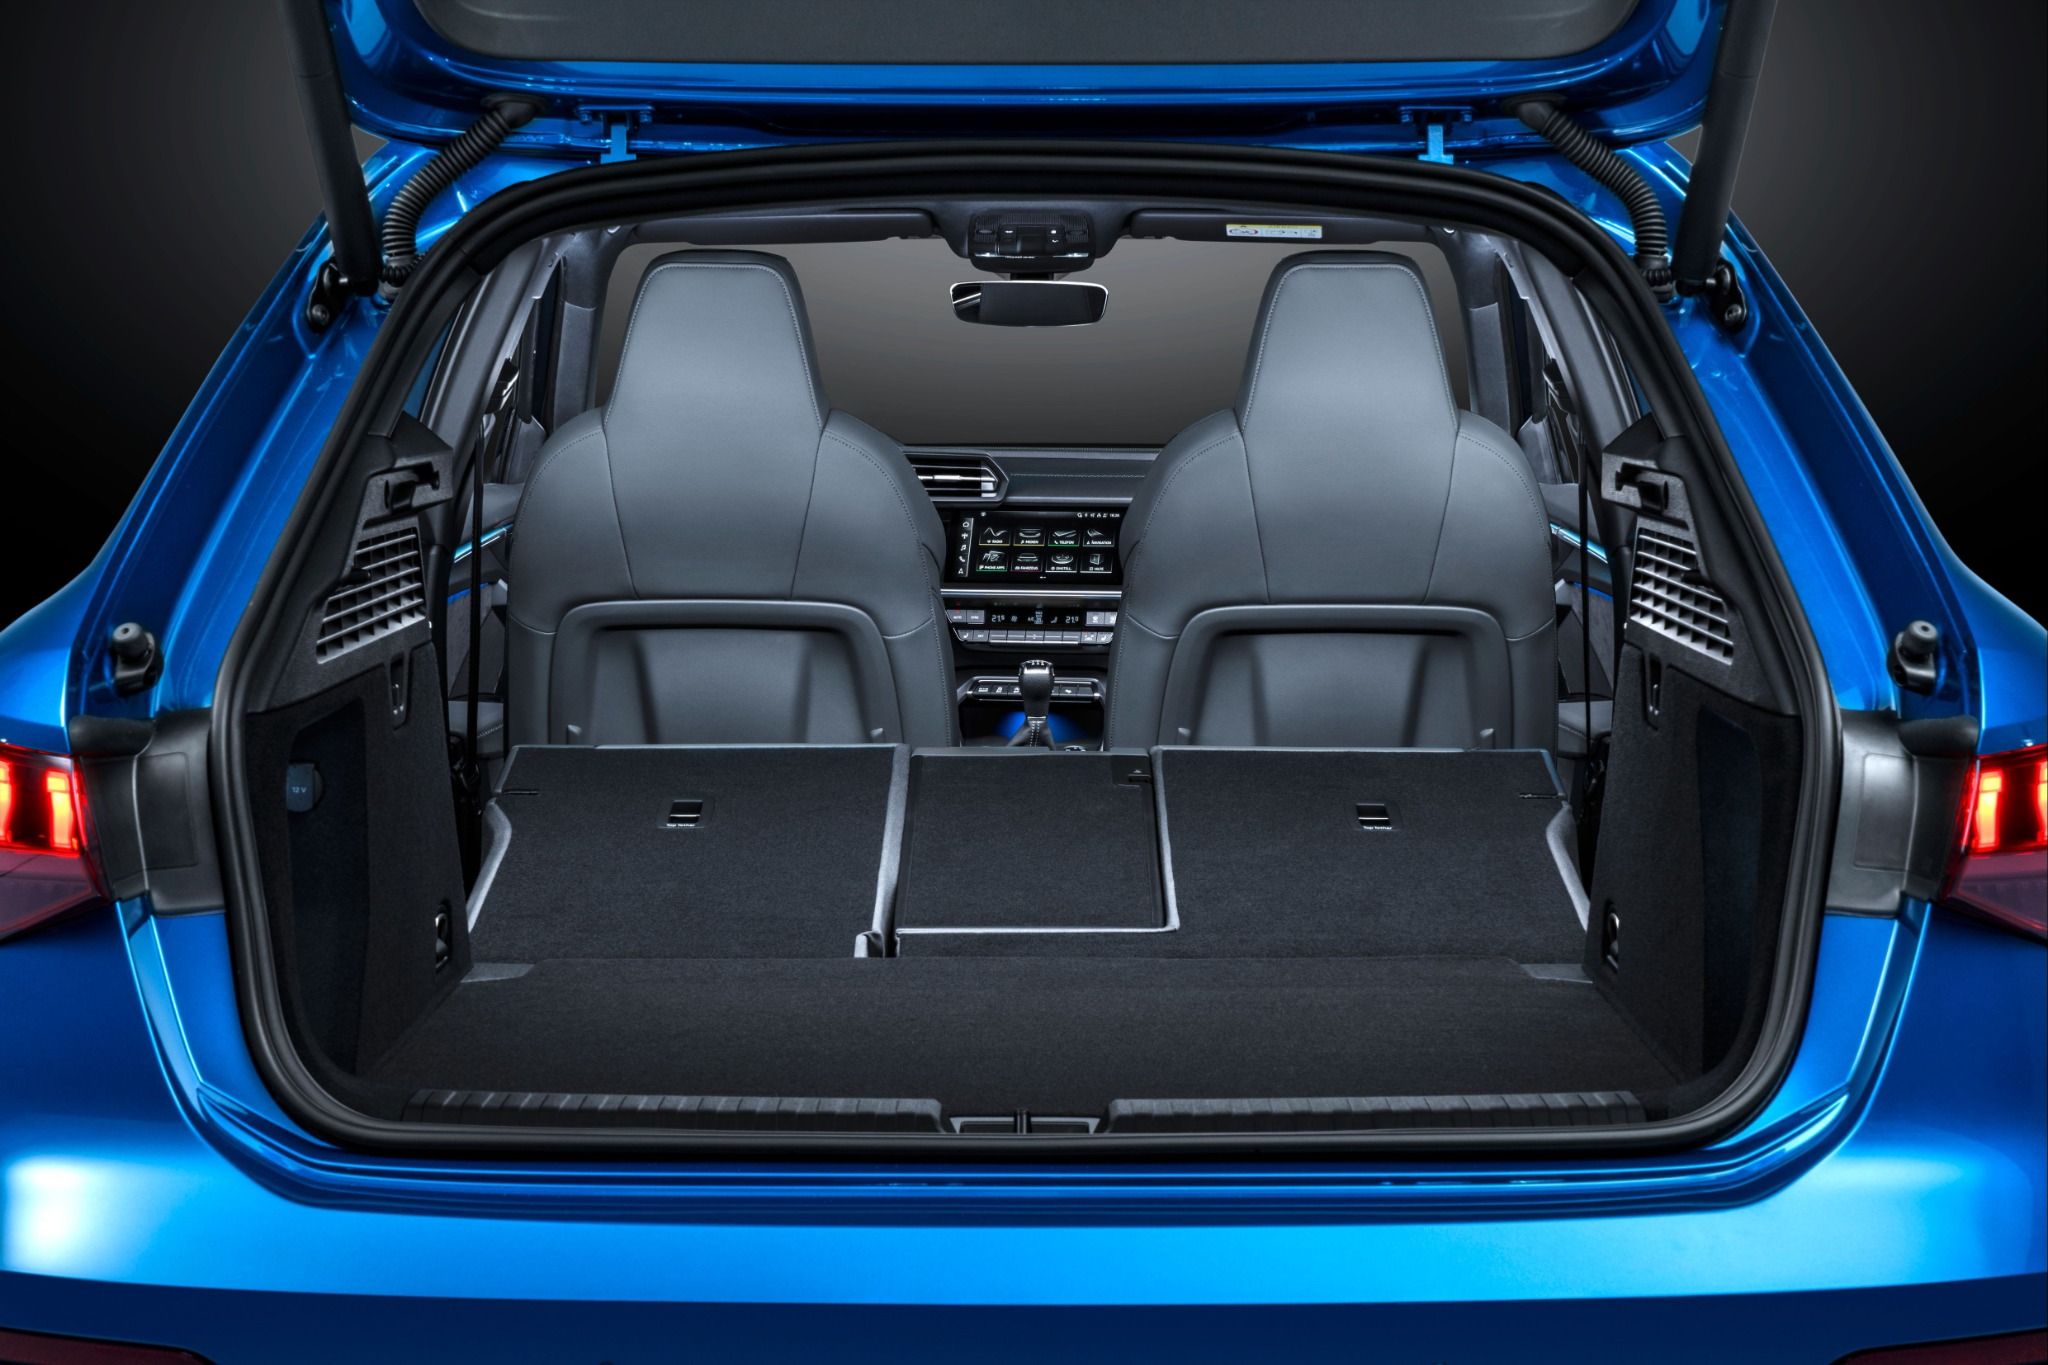 A3 Sportback boot space